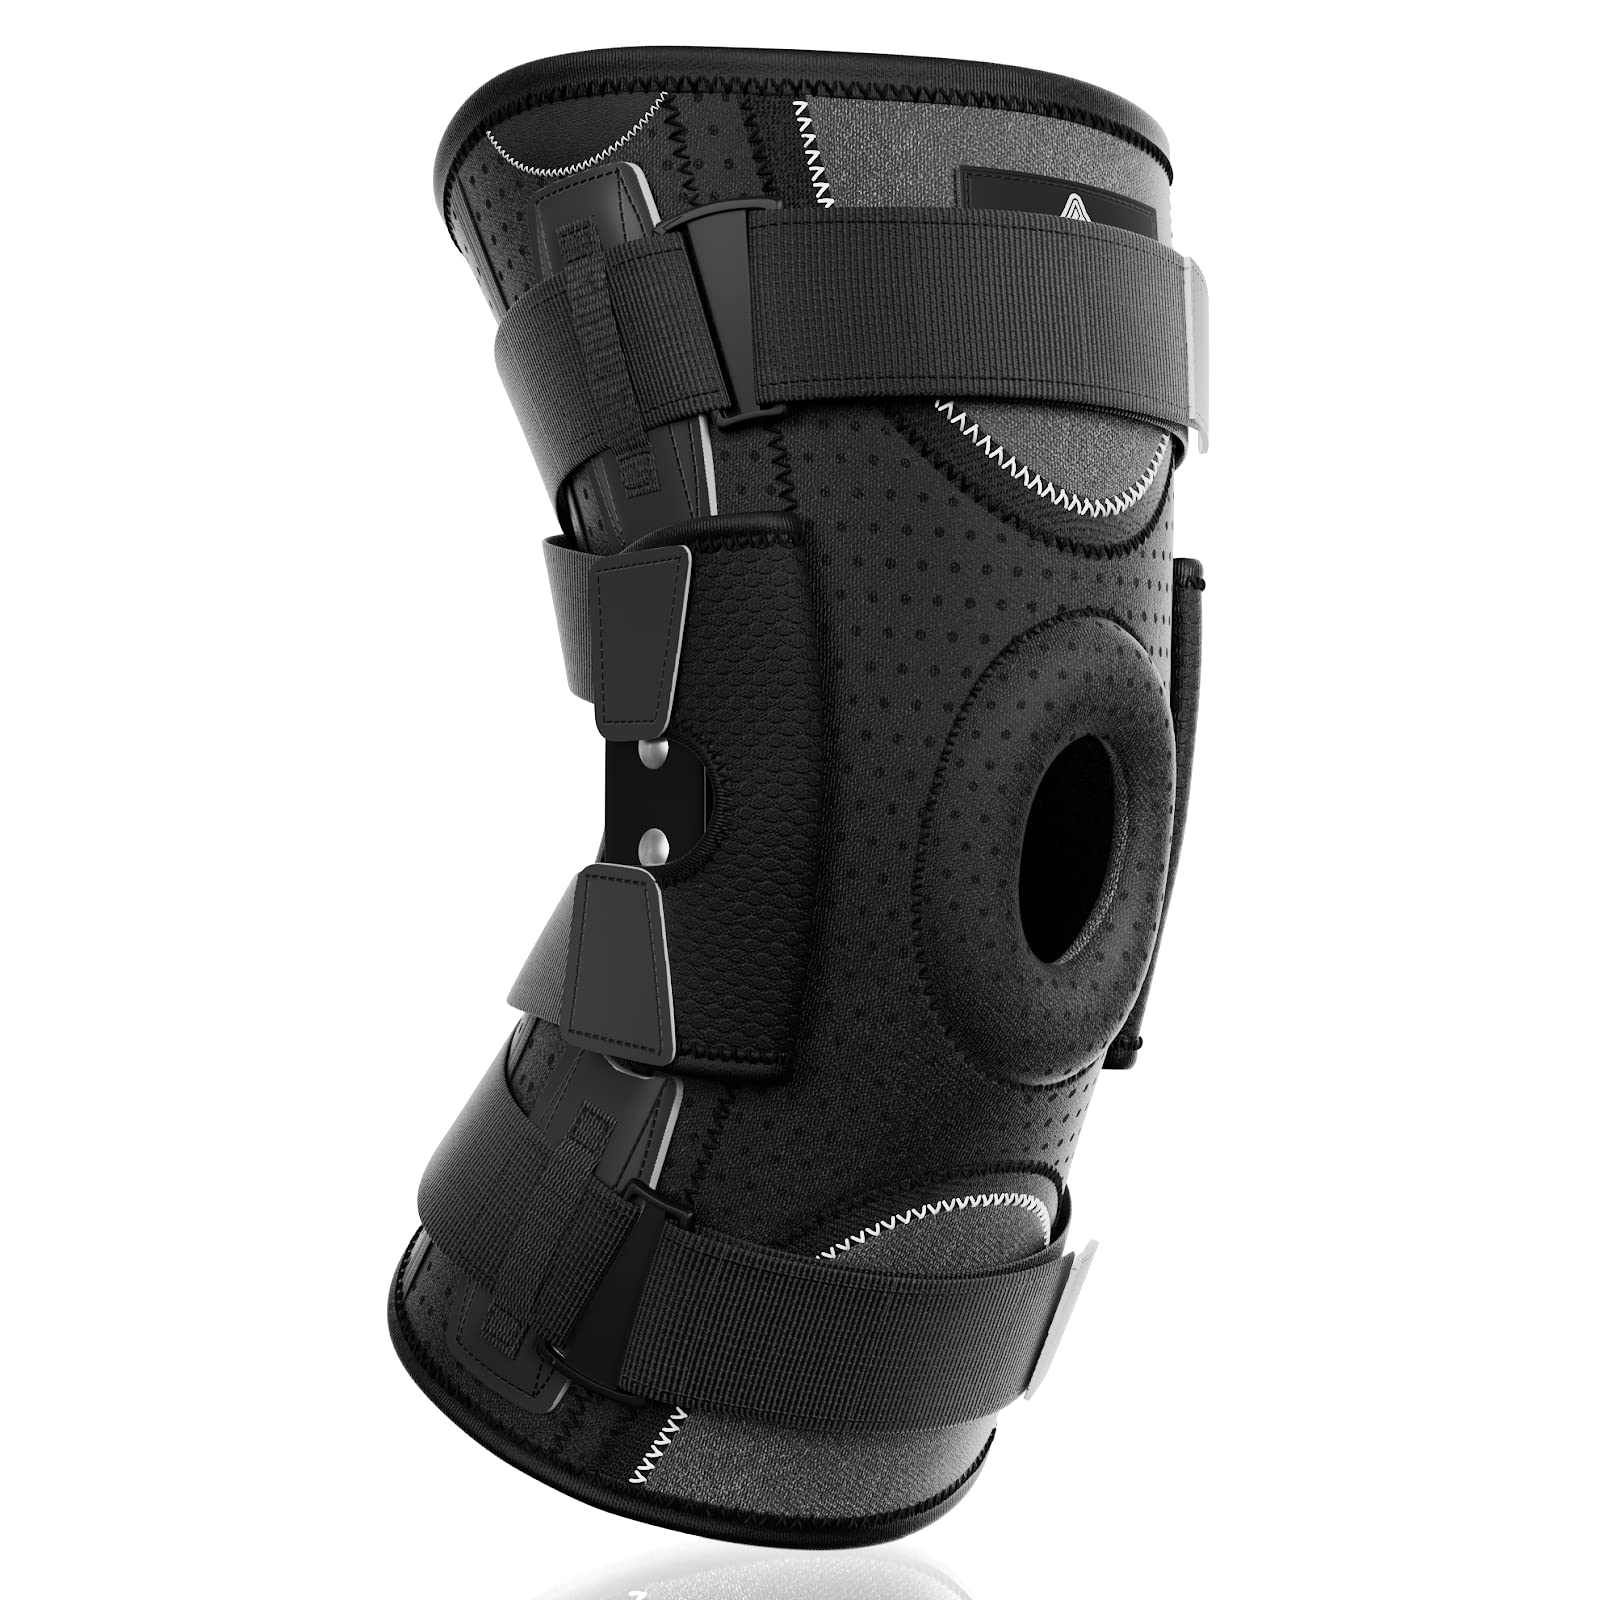 Hinged Knee Brace for Men and Women, Knee Support for Swollen ACL, Tendon,  Ligament and Meniscus Injuries (X-Large)